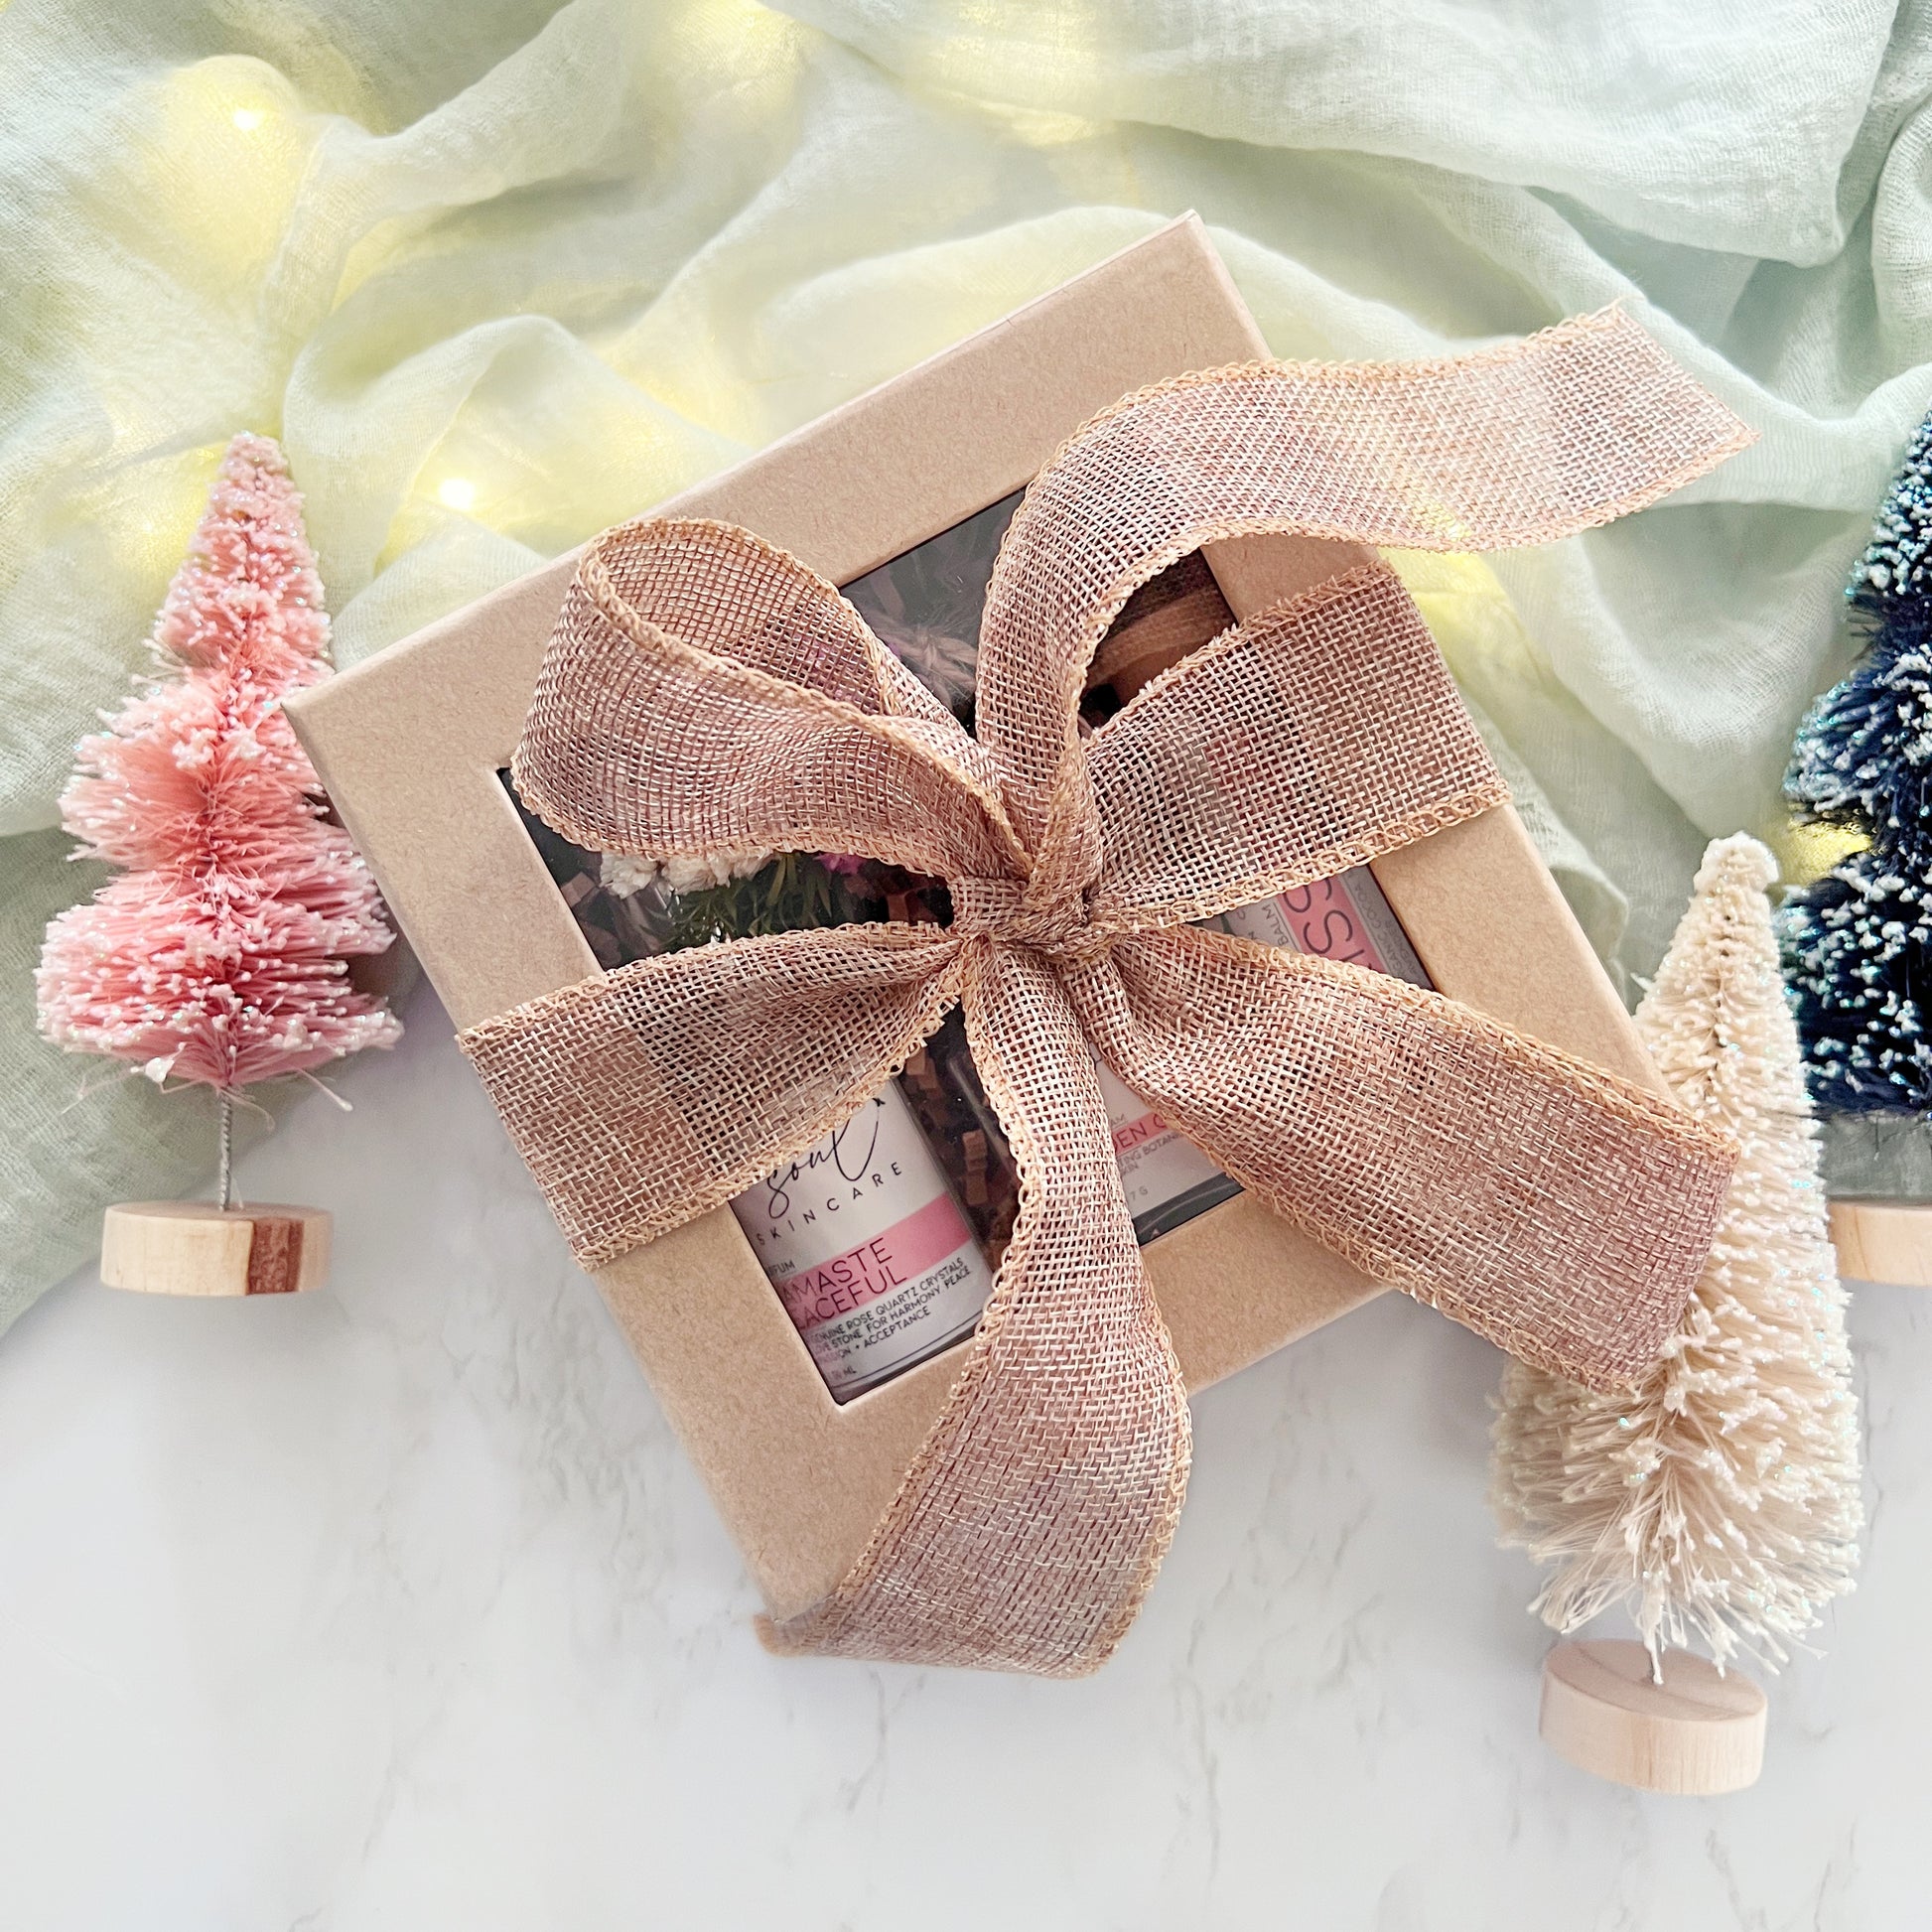 Luxury gift box for the holidays featuring self care products